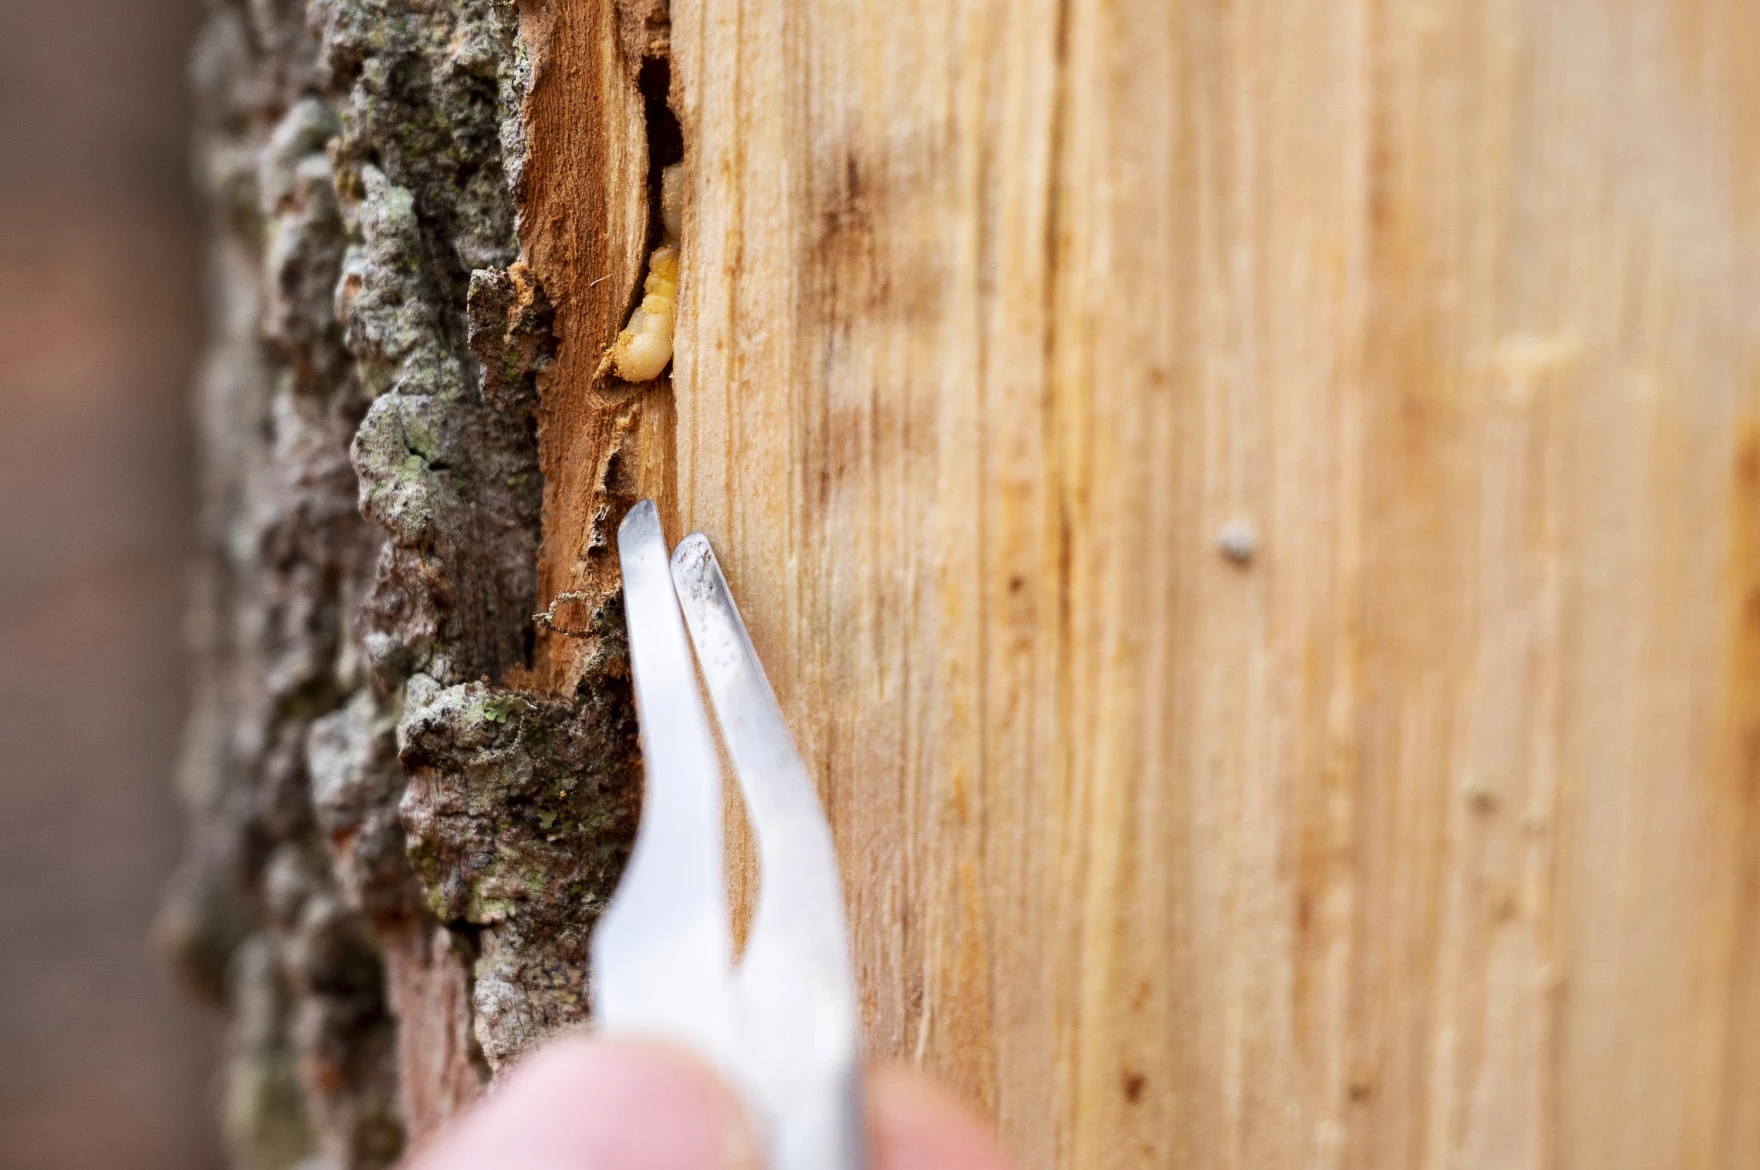 A close up of harvesting a small larvae from inside a tree with a metal pick